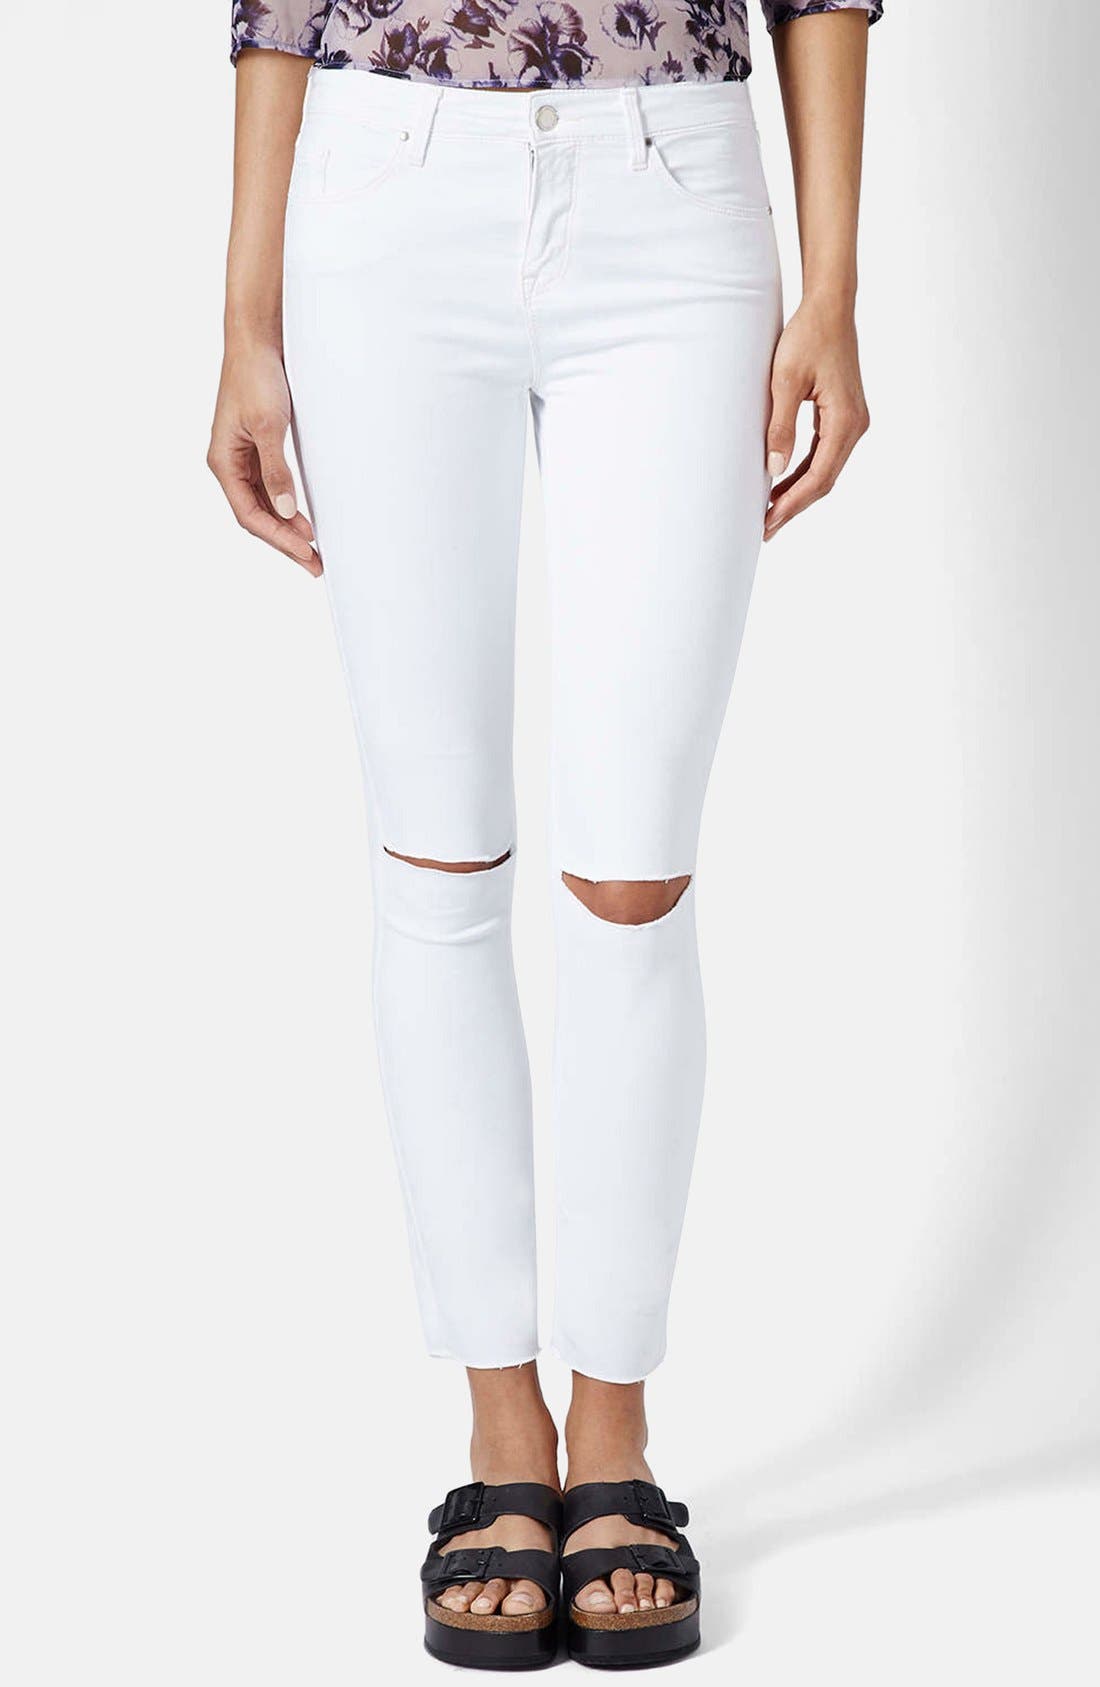 topshop moto leigh ripped skinny jeans